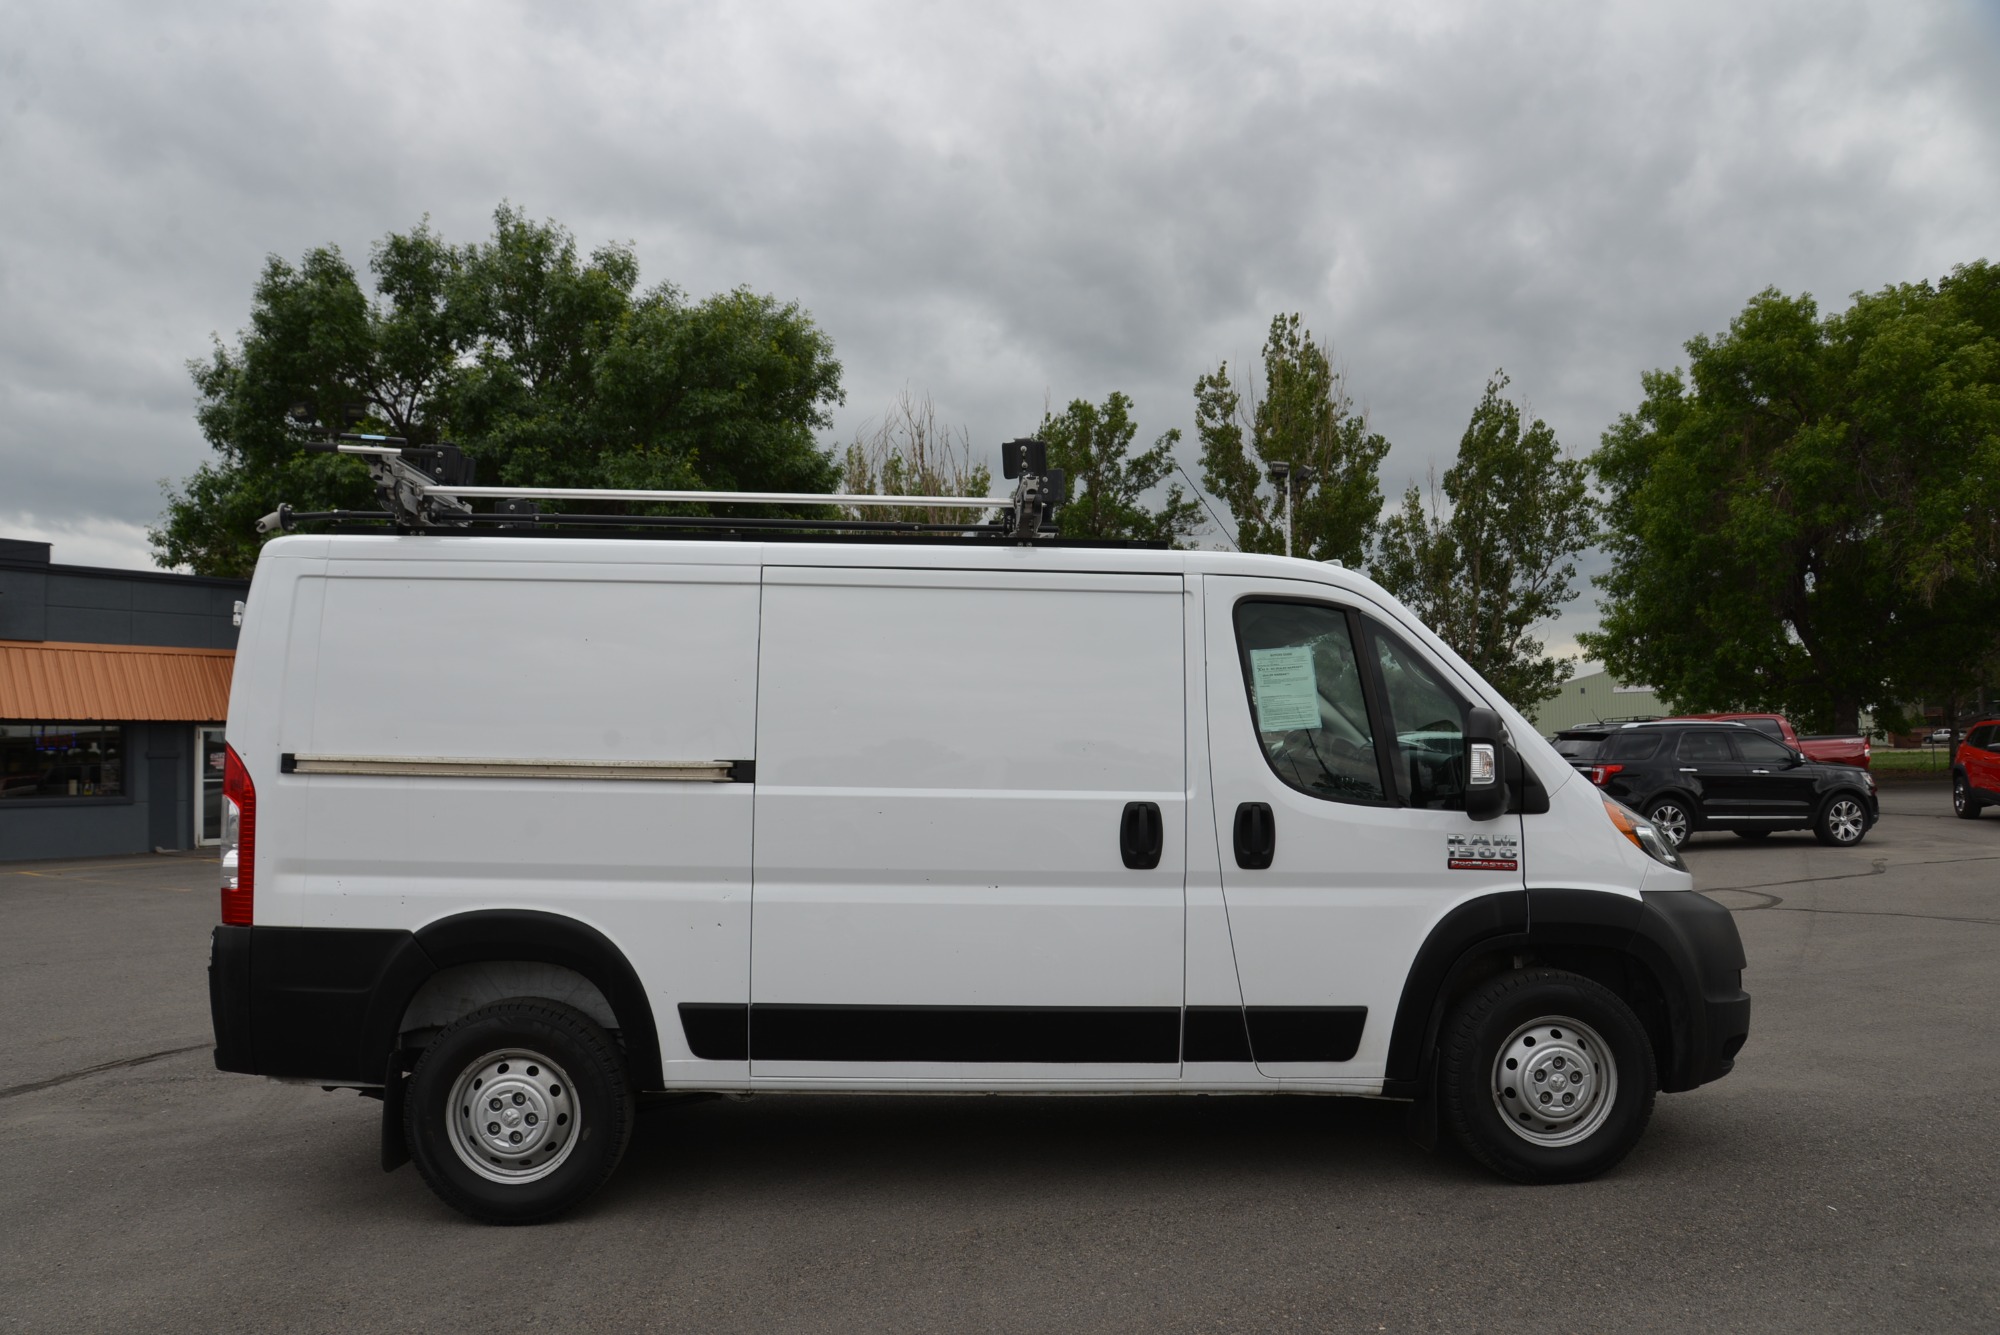 2021 RAM Promaster 1500 Low Roof 136-in. WB